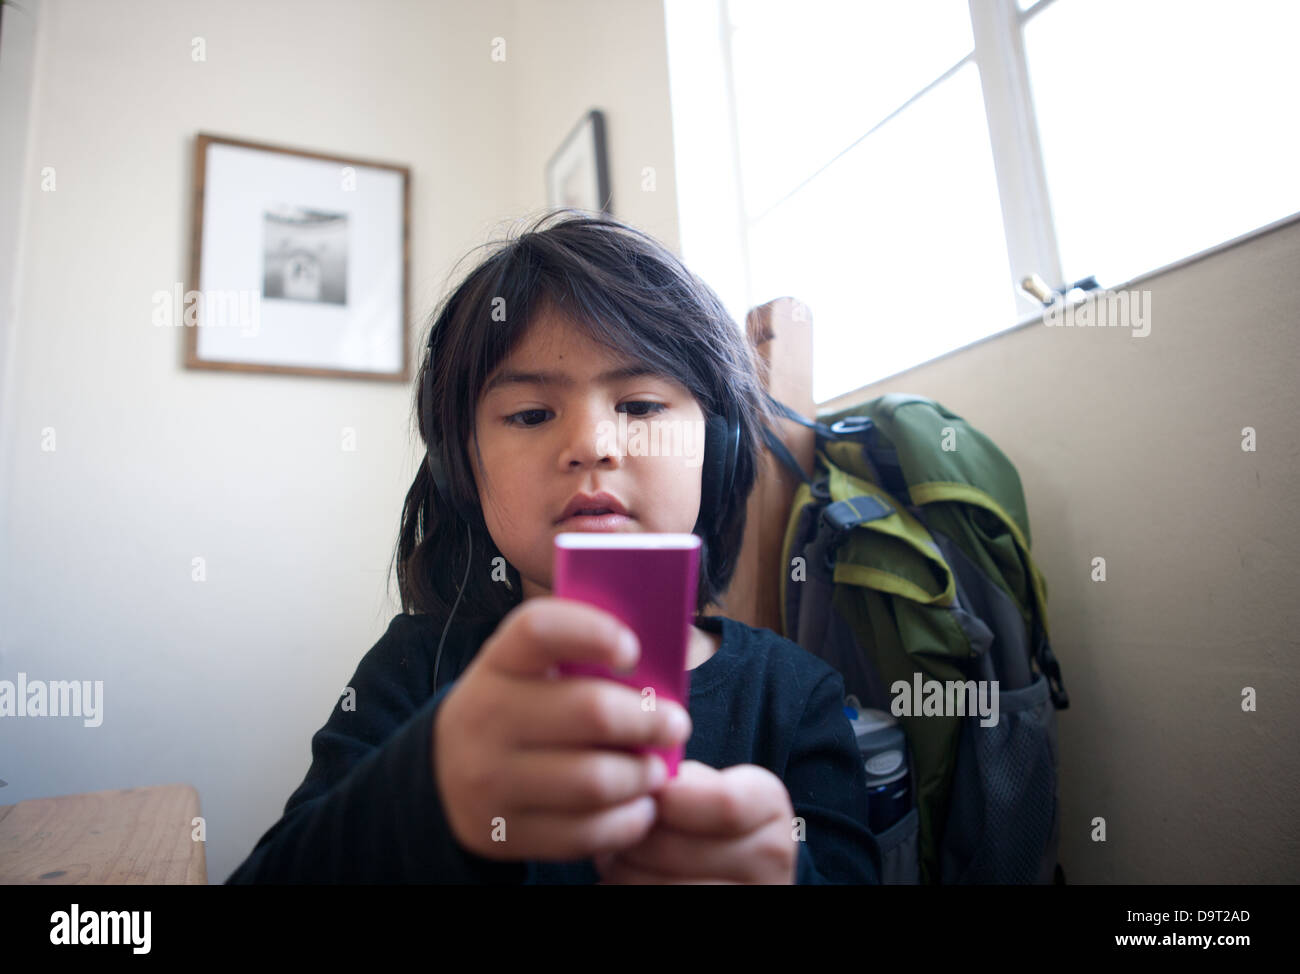 Young girl making a play list of songs on an ipod at home. Stock Photo